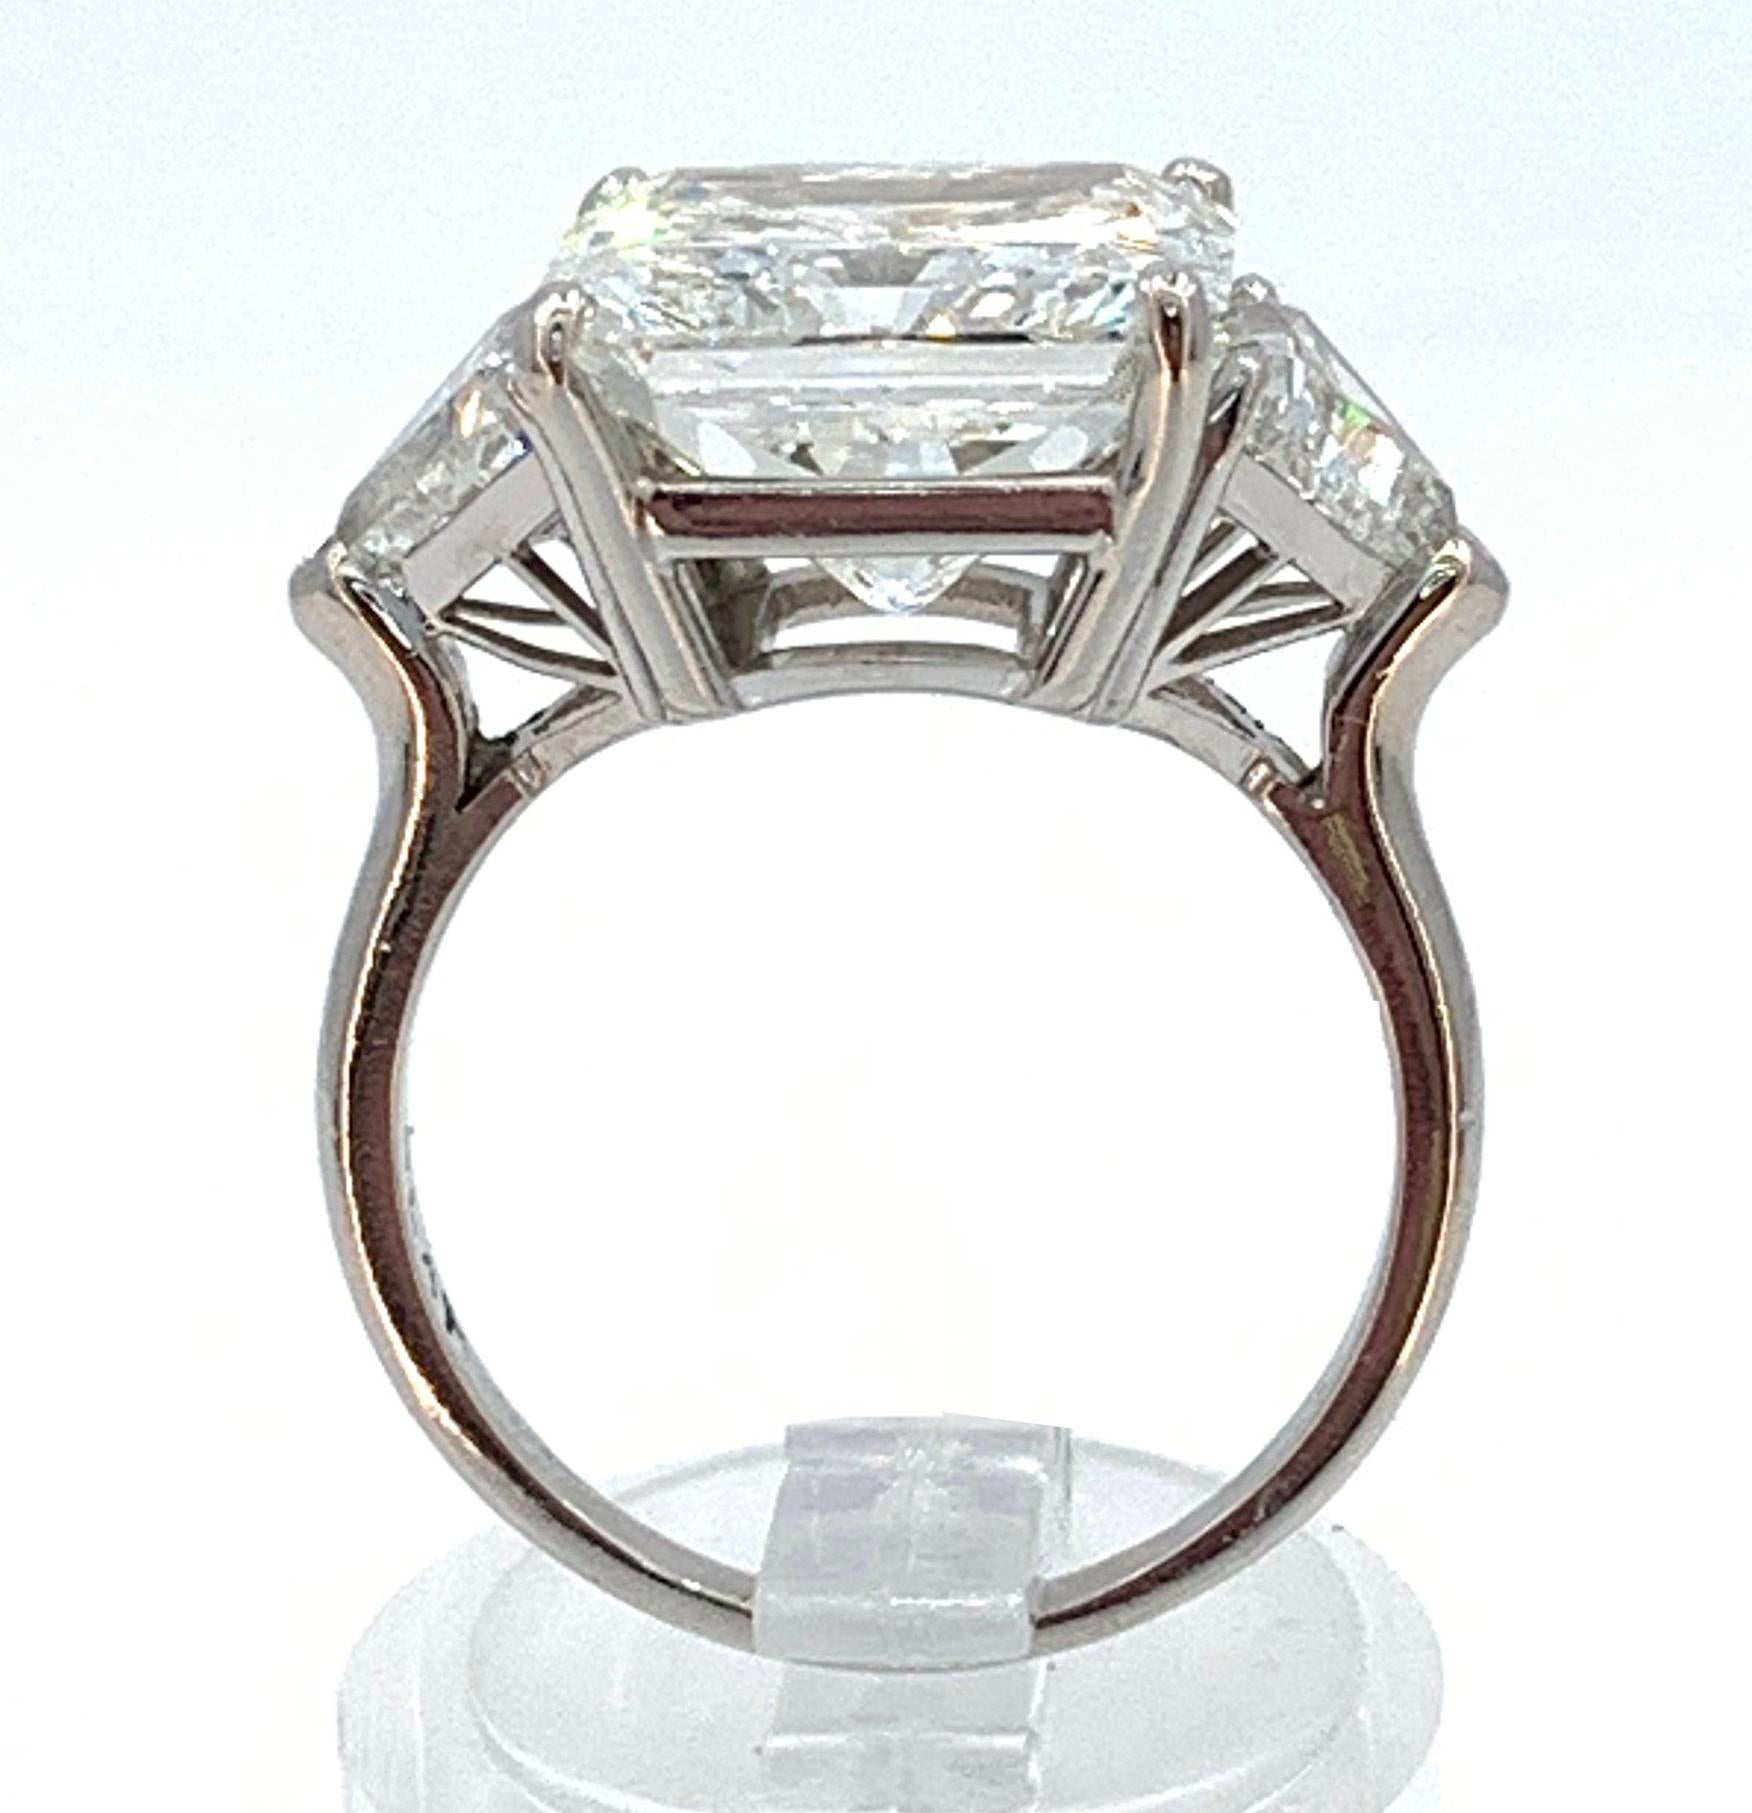 Radiant Cut GIA-Certified 7.27 Carat Radiant-Cut Diamond Ring with 0.75 Carat Side Trillions